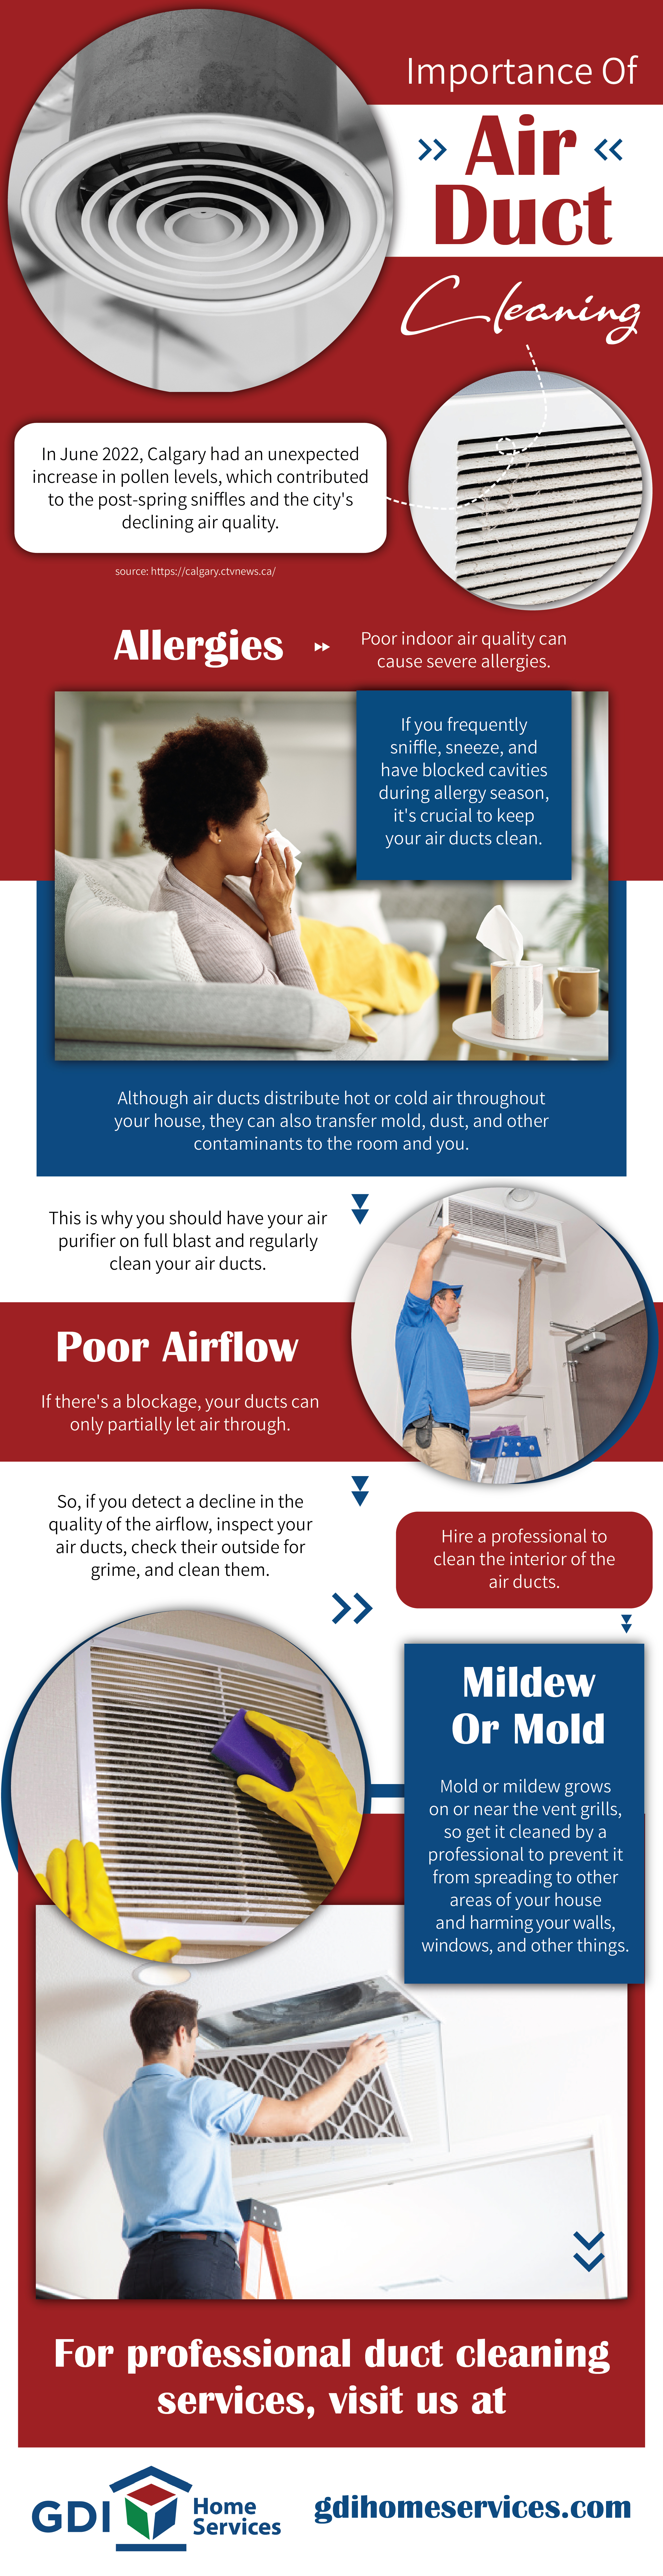 The Importance of Air Duct Cleaning - Infograph